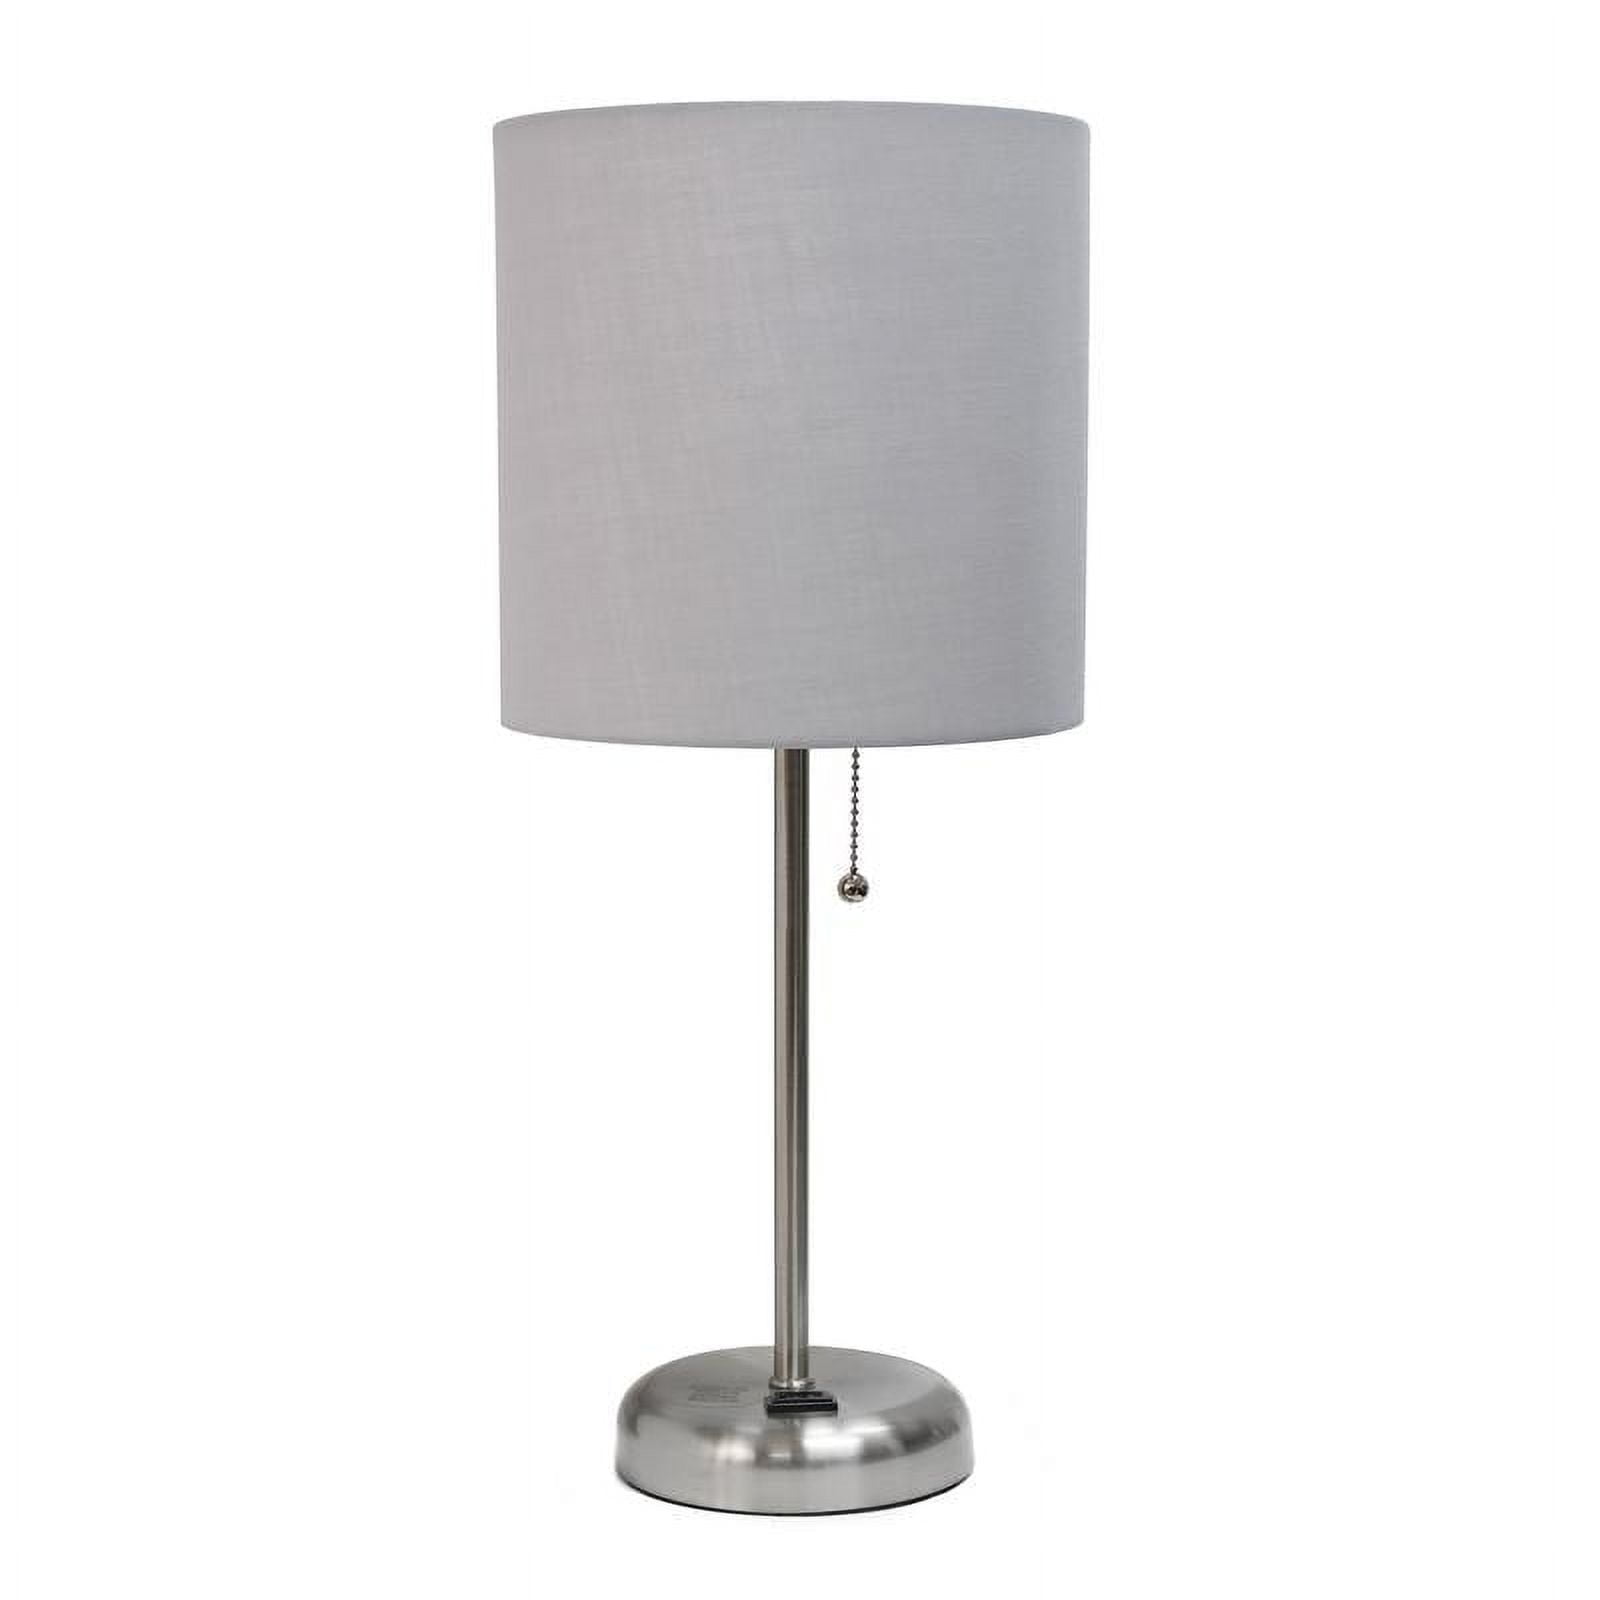 Lt2024-gry Stick Lamp With Charging Outlet & Fabric Shade, Gray